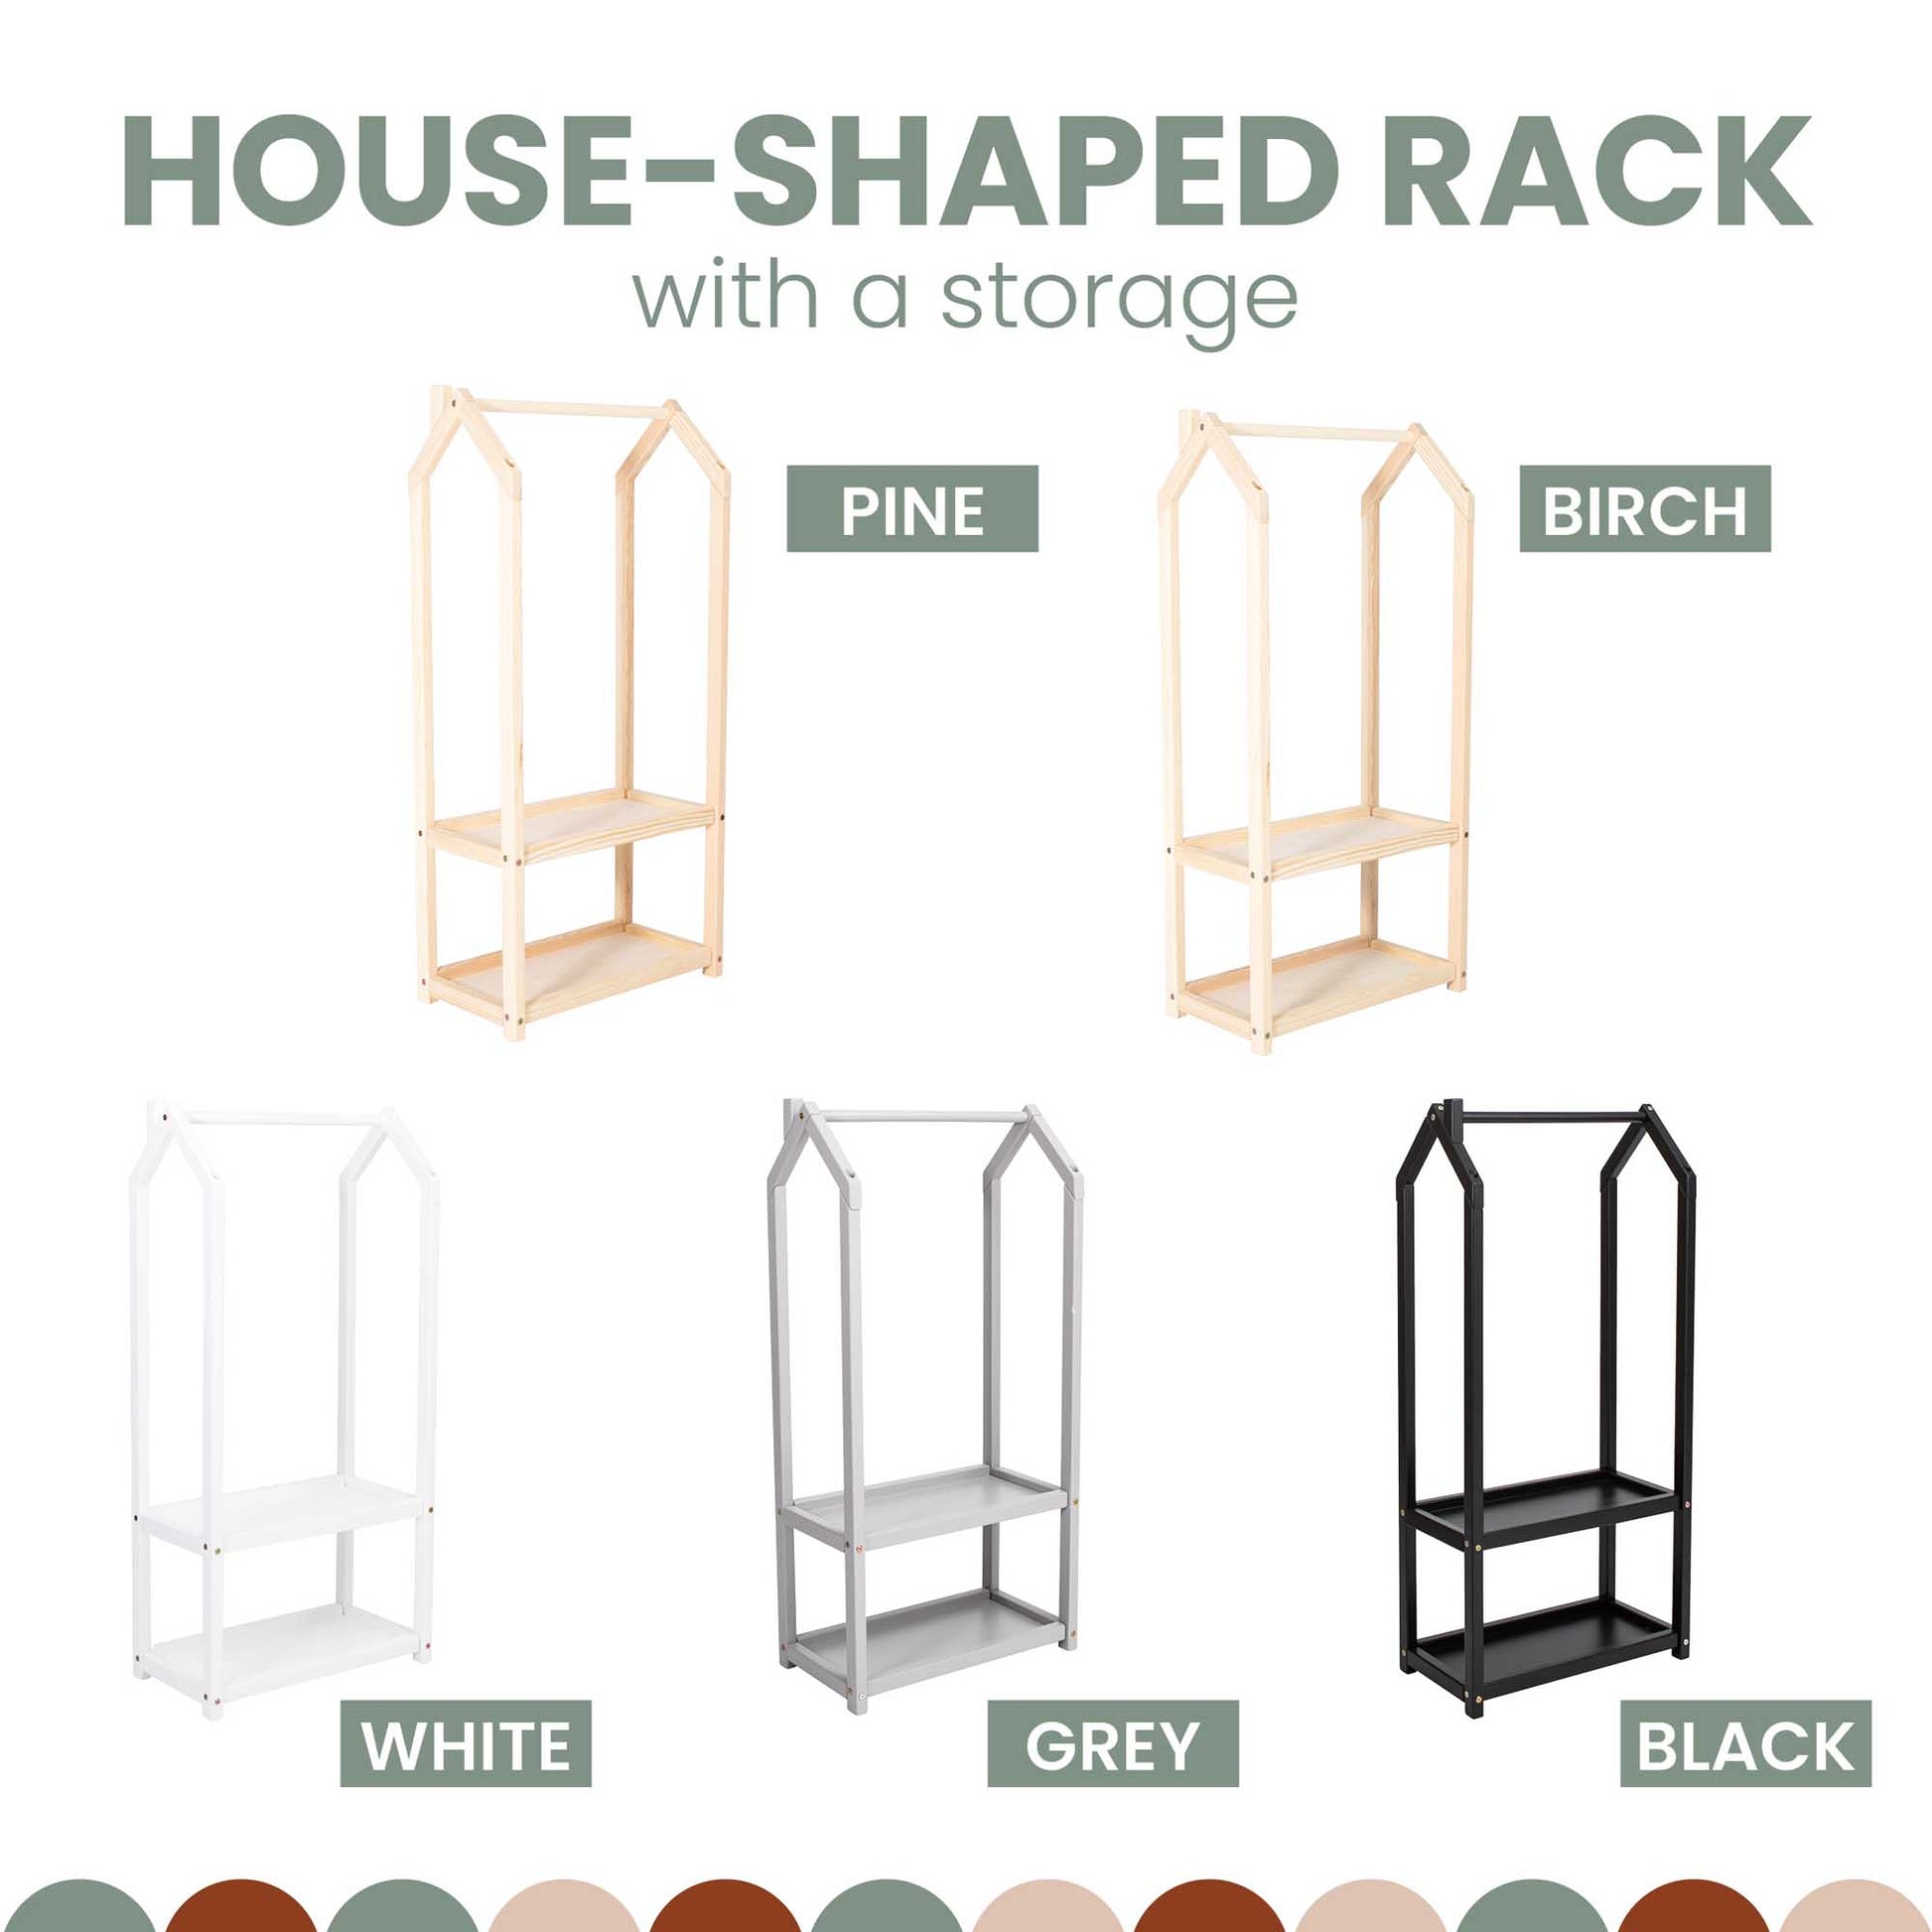 Wooden house-shaped rack with storage, suitable for Montessori principles and can be used as a Montessori wardrobe.